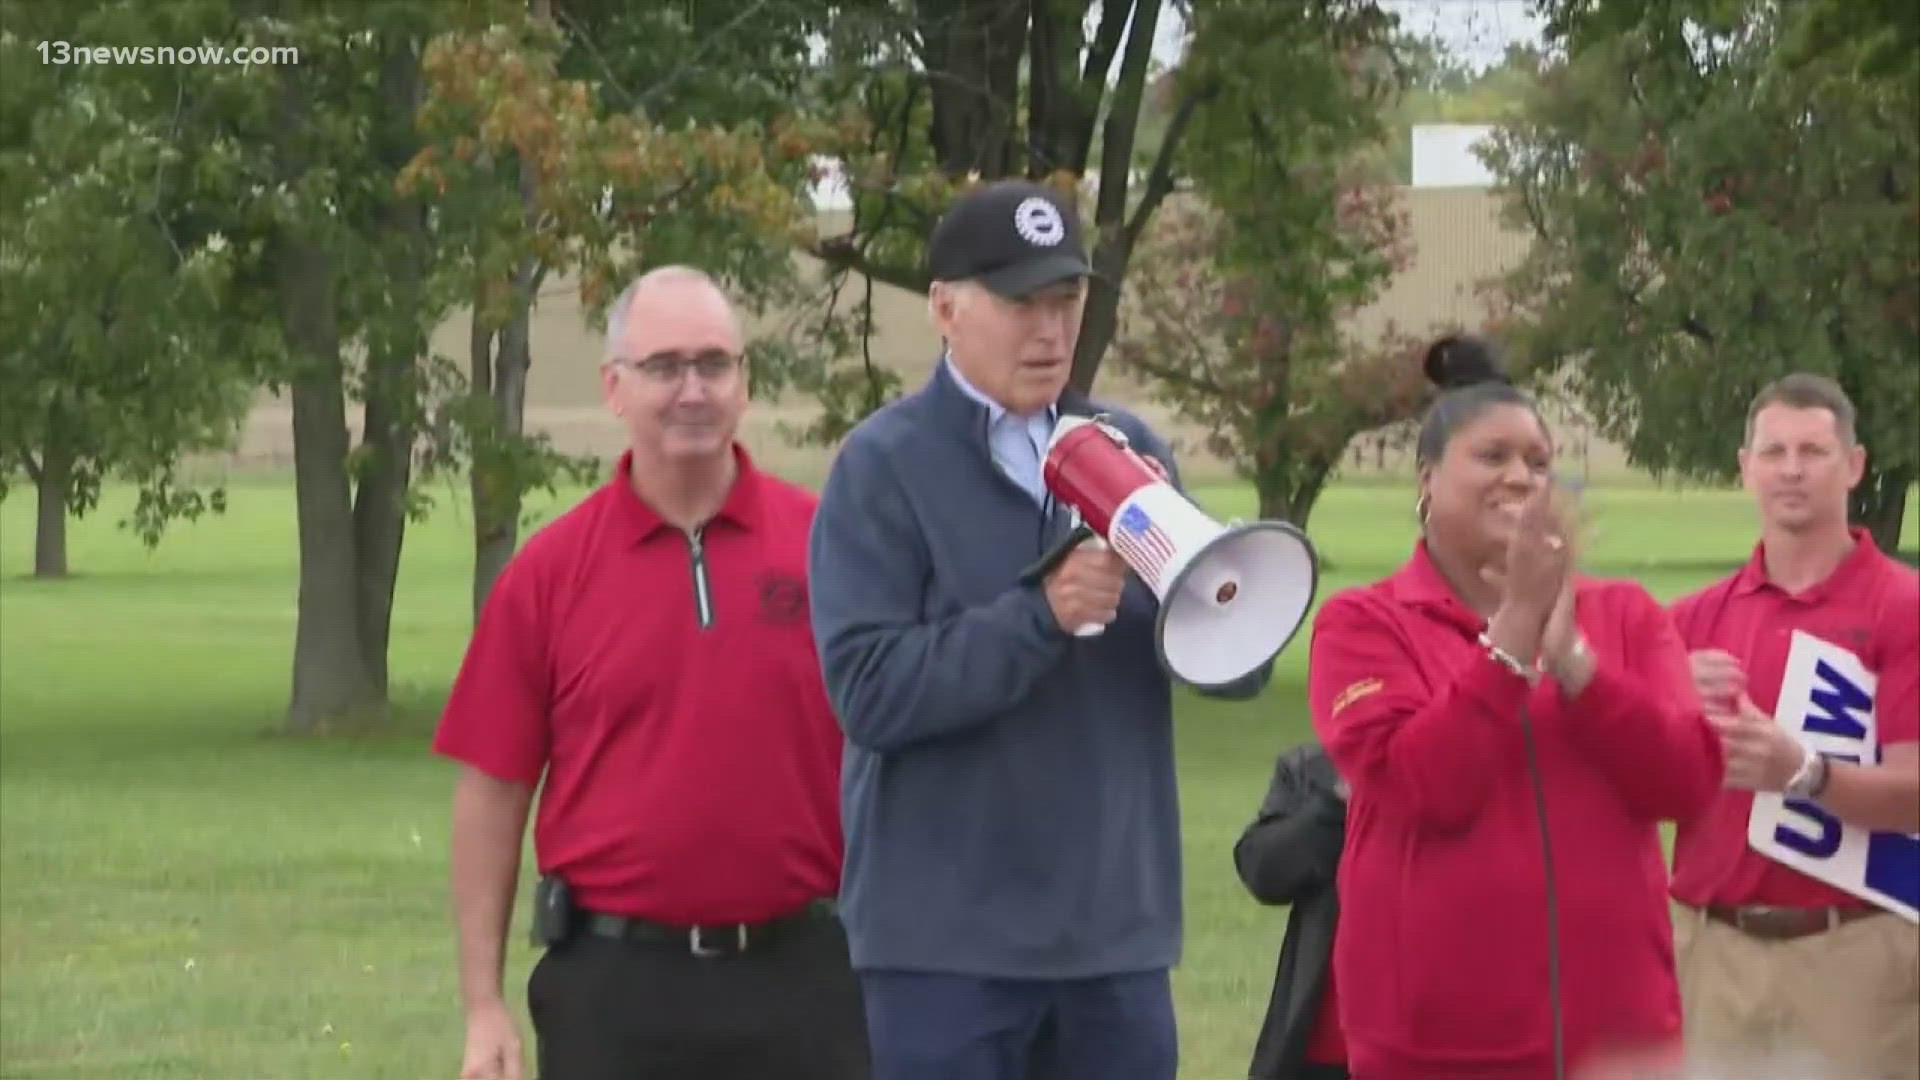 President Joe Biden grabbed a bullhorn on the picket line and urged striking auto workers to “stick with it” in an unparalleled show of support for organized labor.